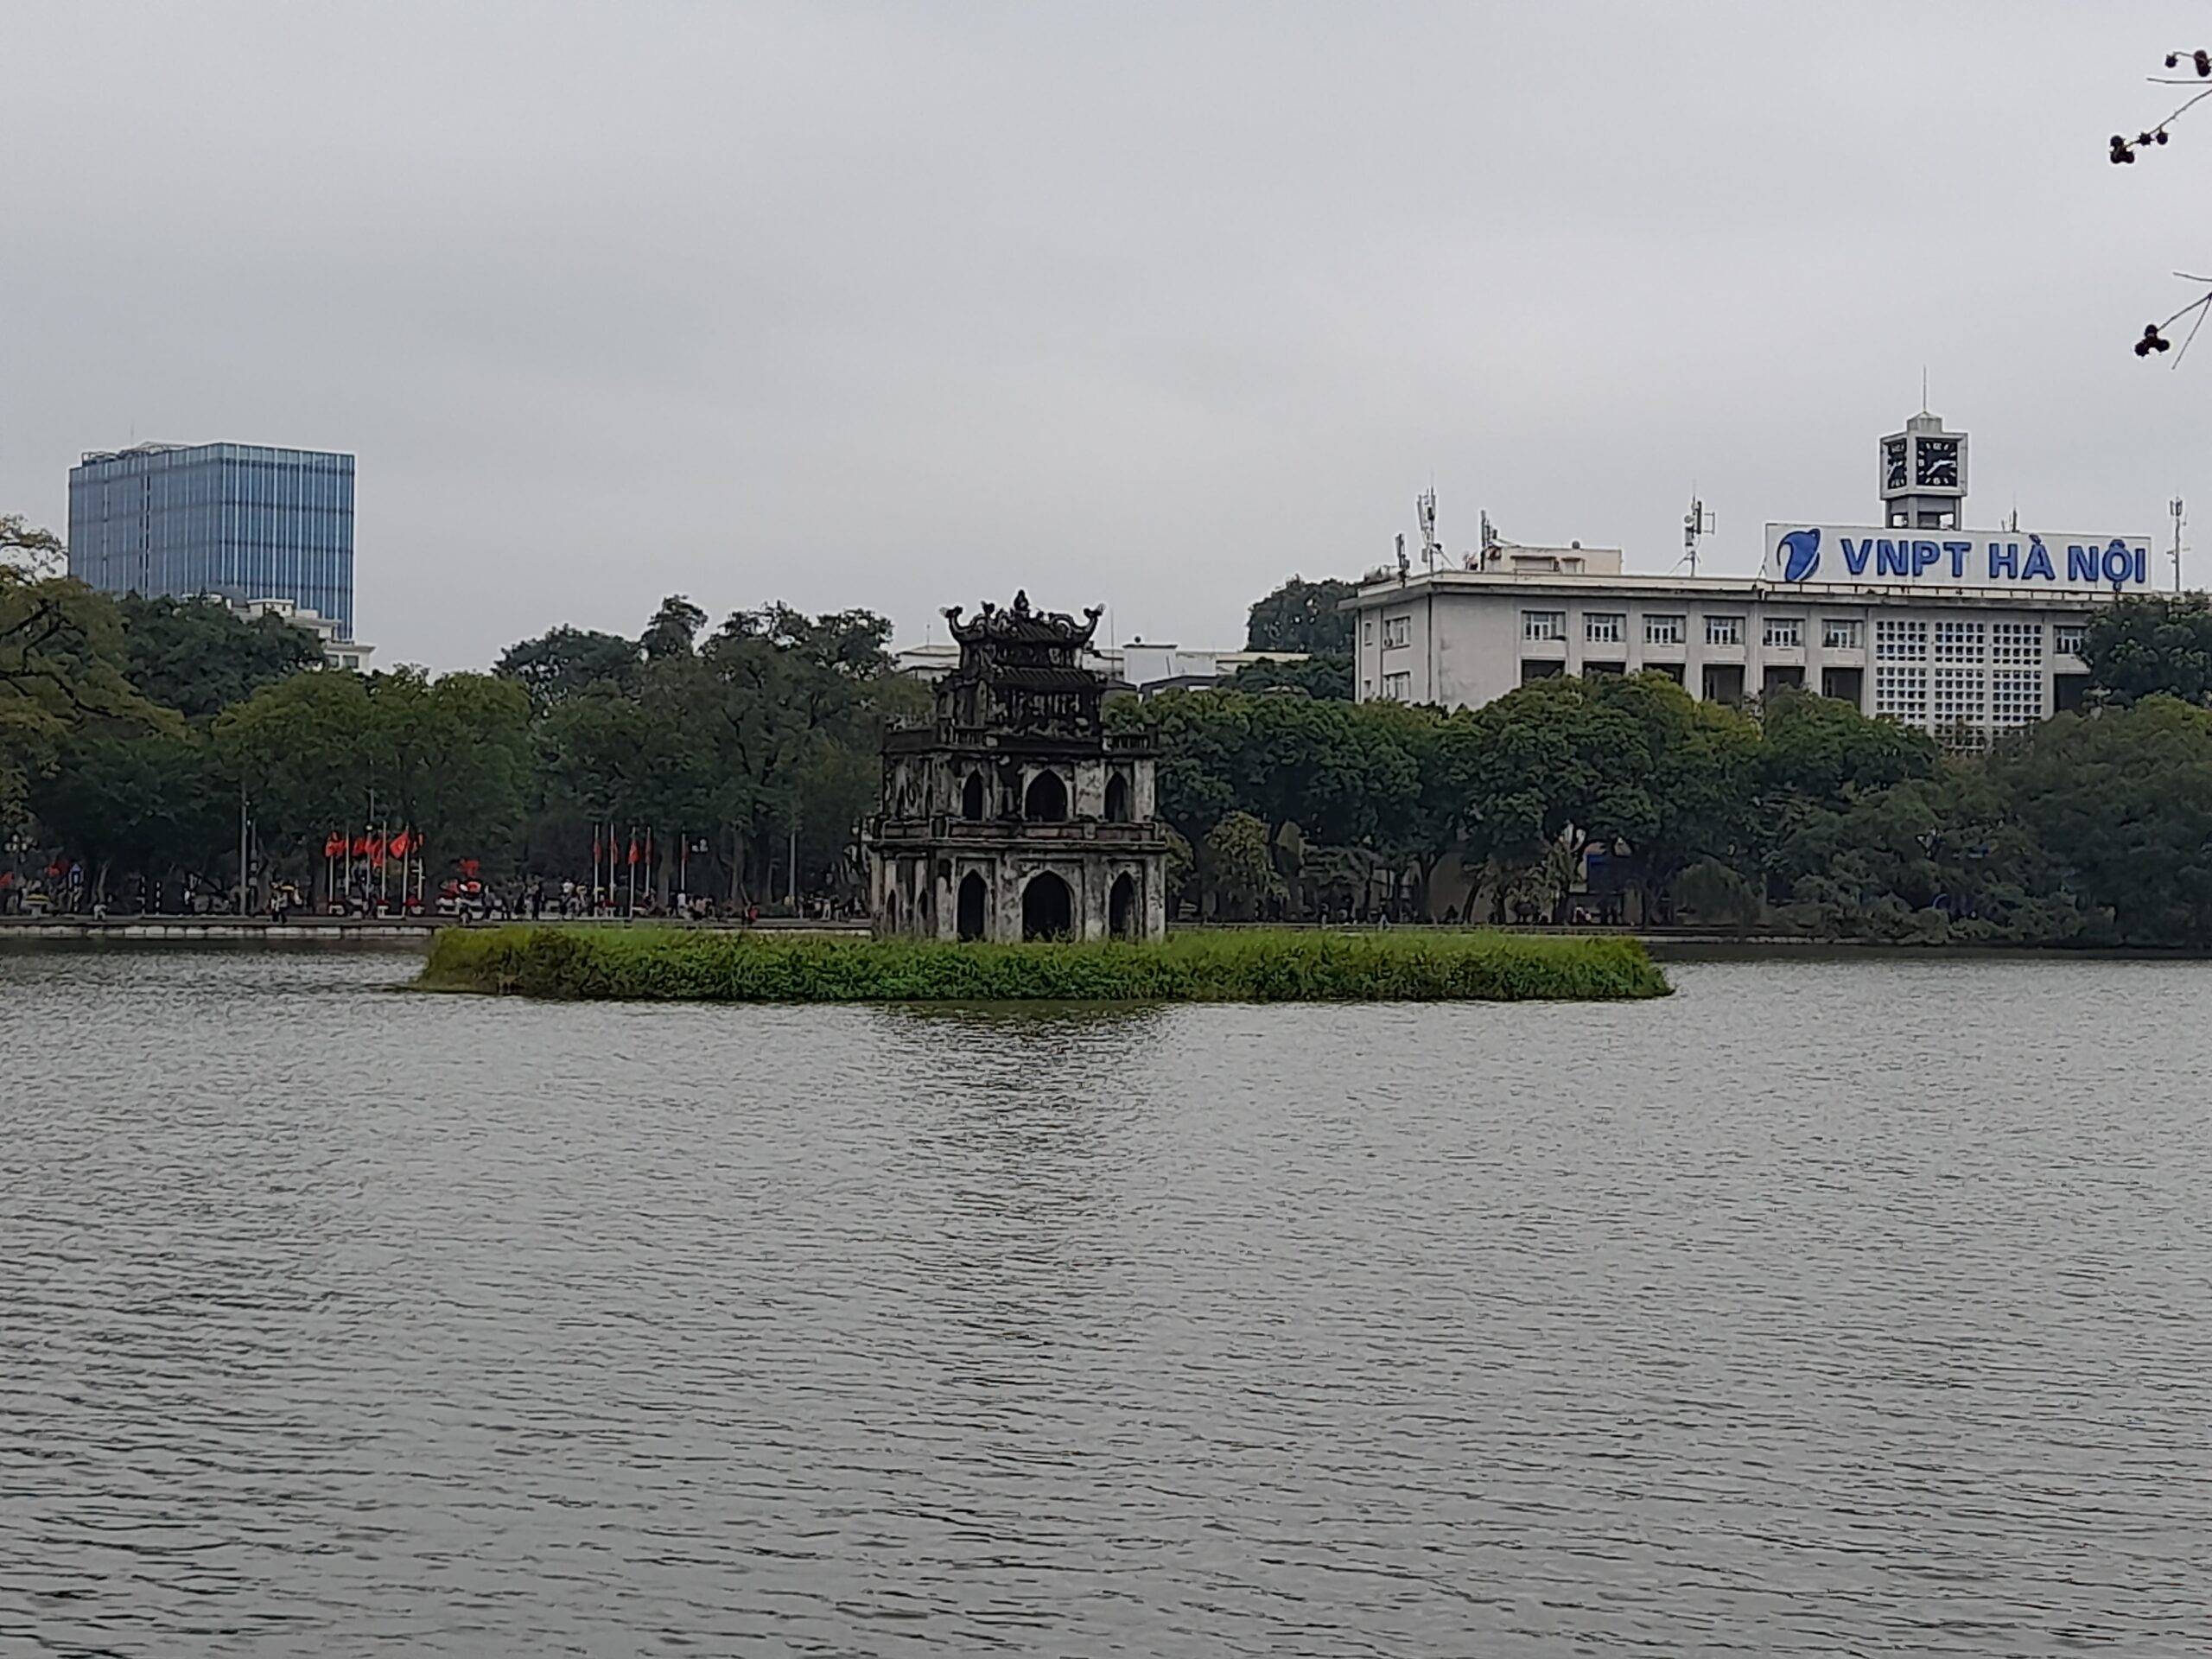 Top free places to visit in Hanoi